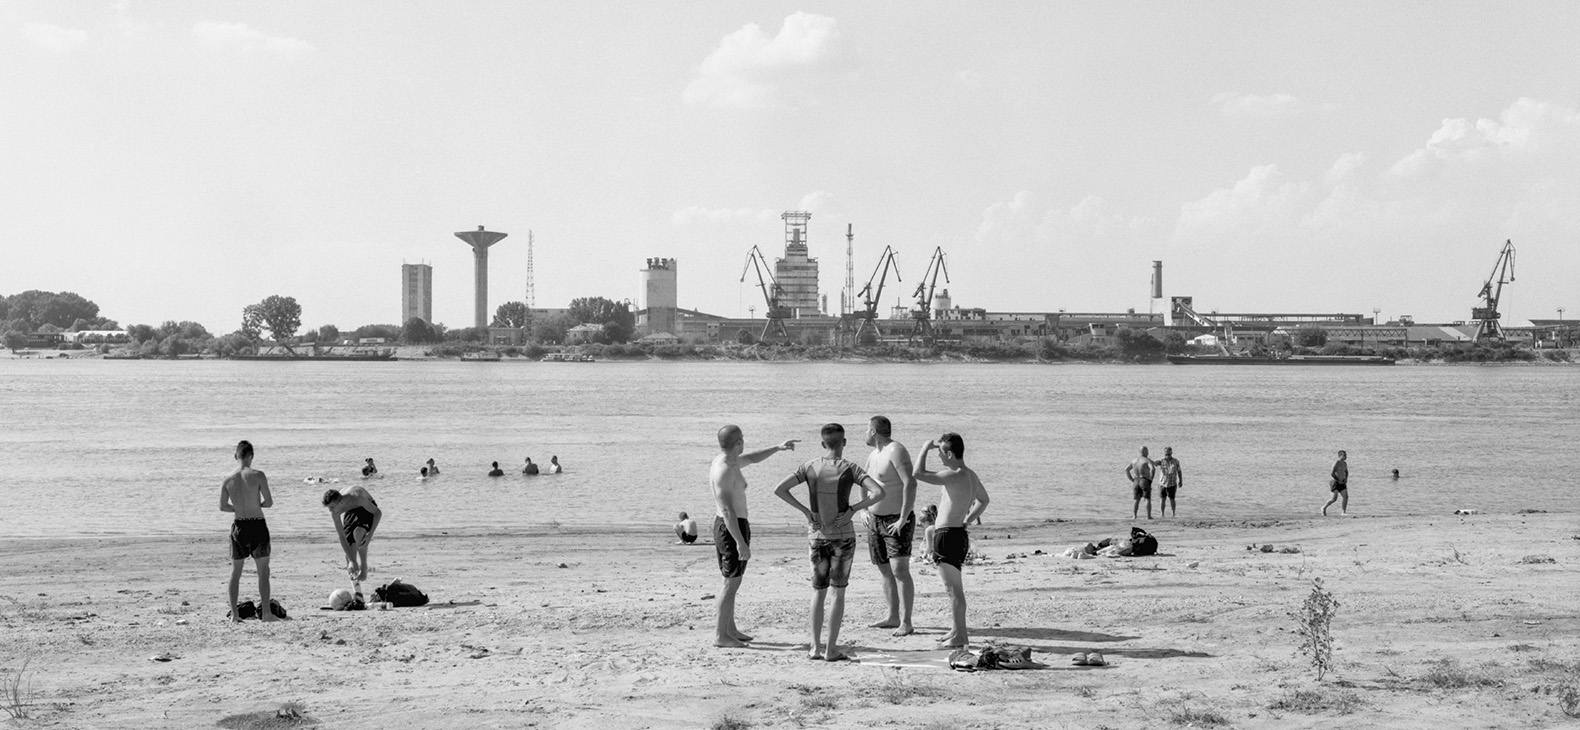 Ute Mahler and Werner Mahler: Danube #155, 2019, detail; silver gelatin print, 90 x 115 cm / b/w photo: group of people in the foreground on the bank of a large river, buildings and industrial plants in the background. 